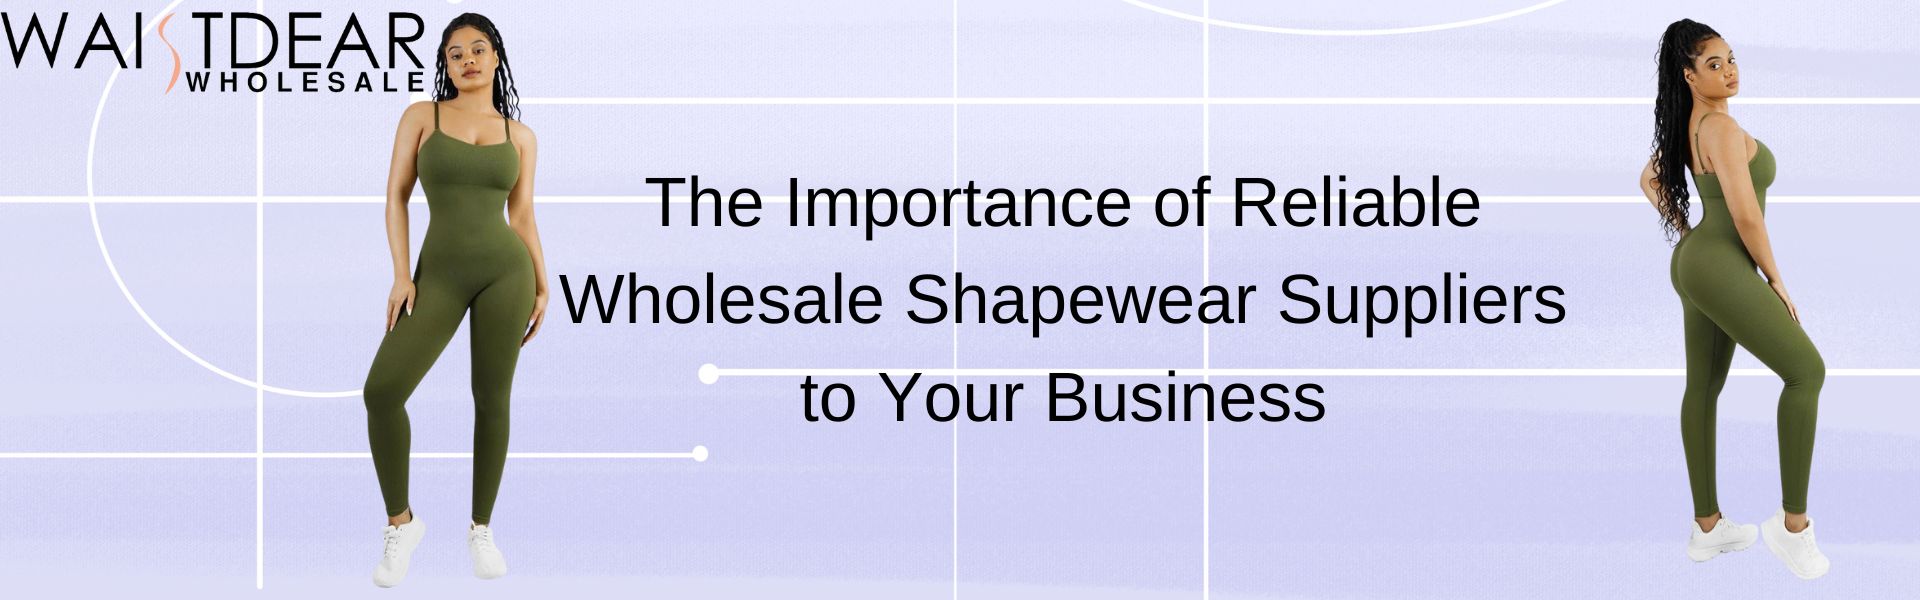 The Importance of Reliable Wholesale Shapewear Suppliers to Your Business